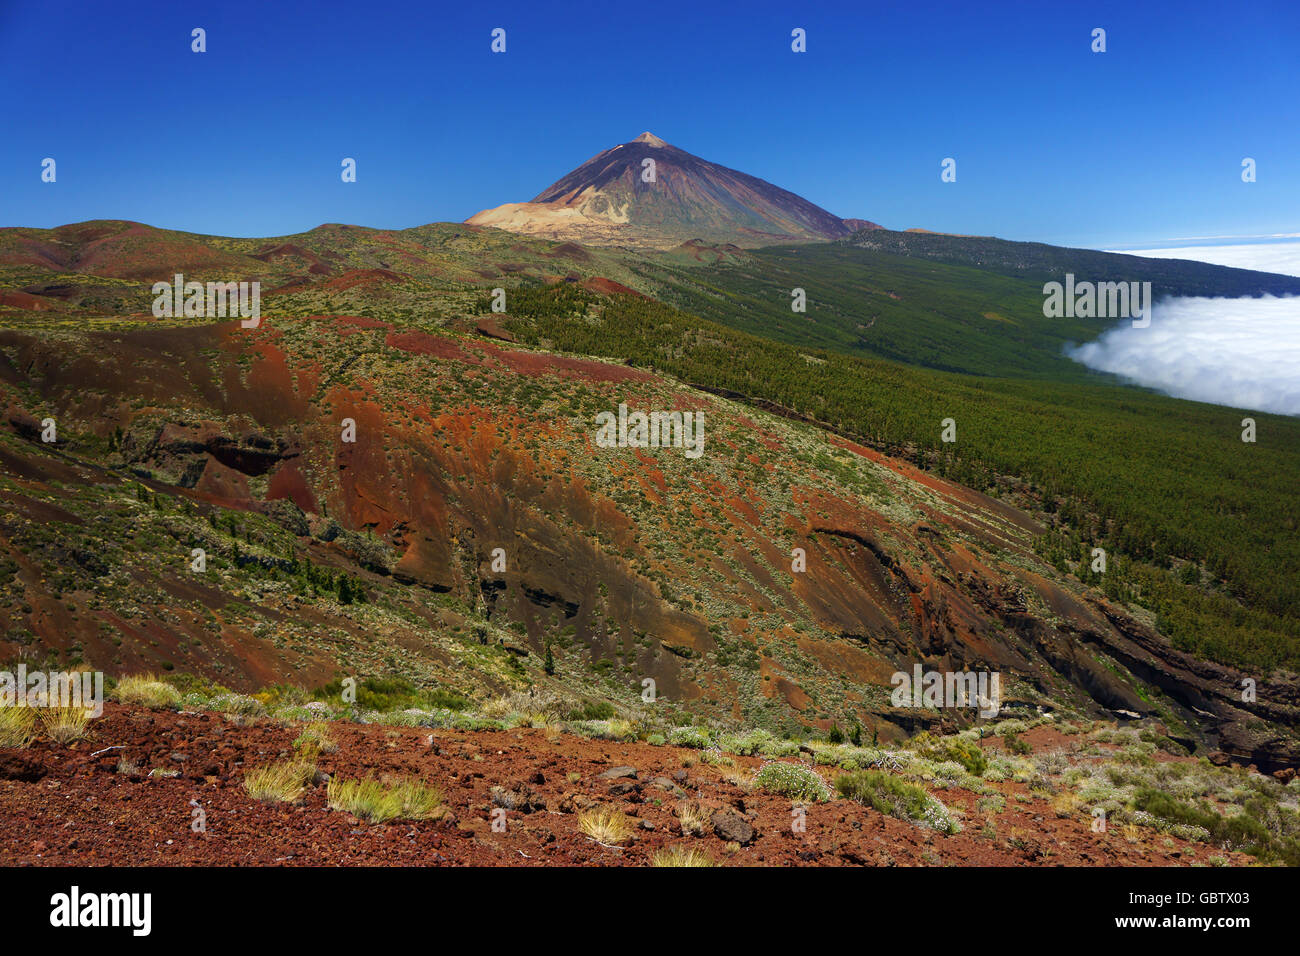 Teide volcano and volcanic ash in vegetation and low laying clouds, Teide National Park, Teneriffe, Canary islands, Spain Stock Photo